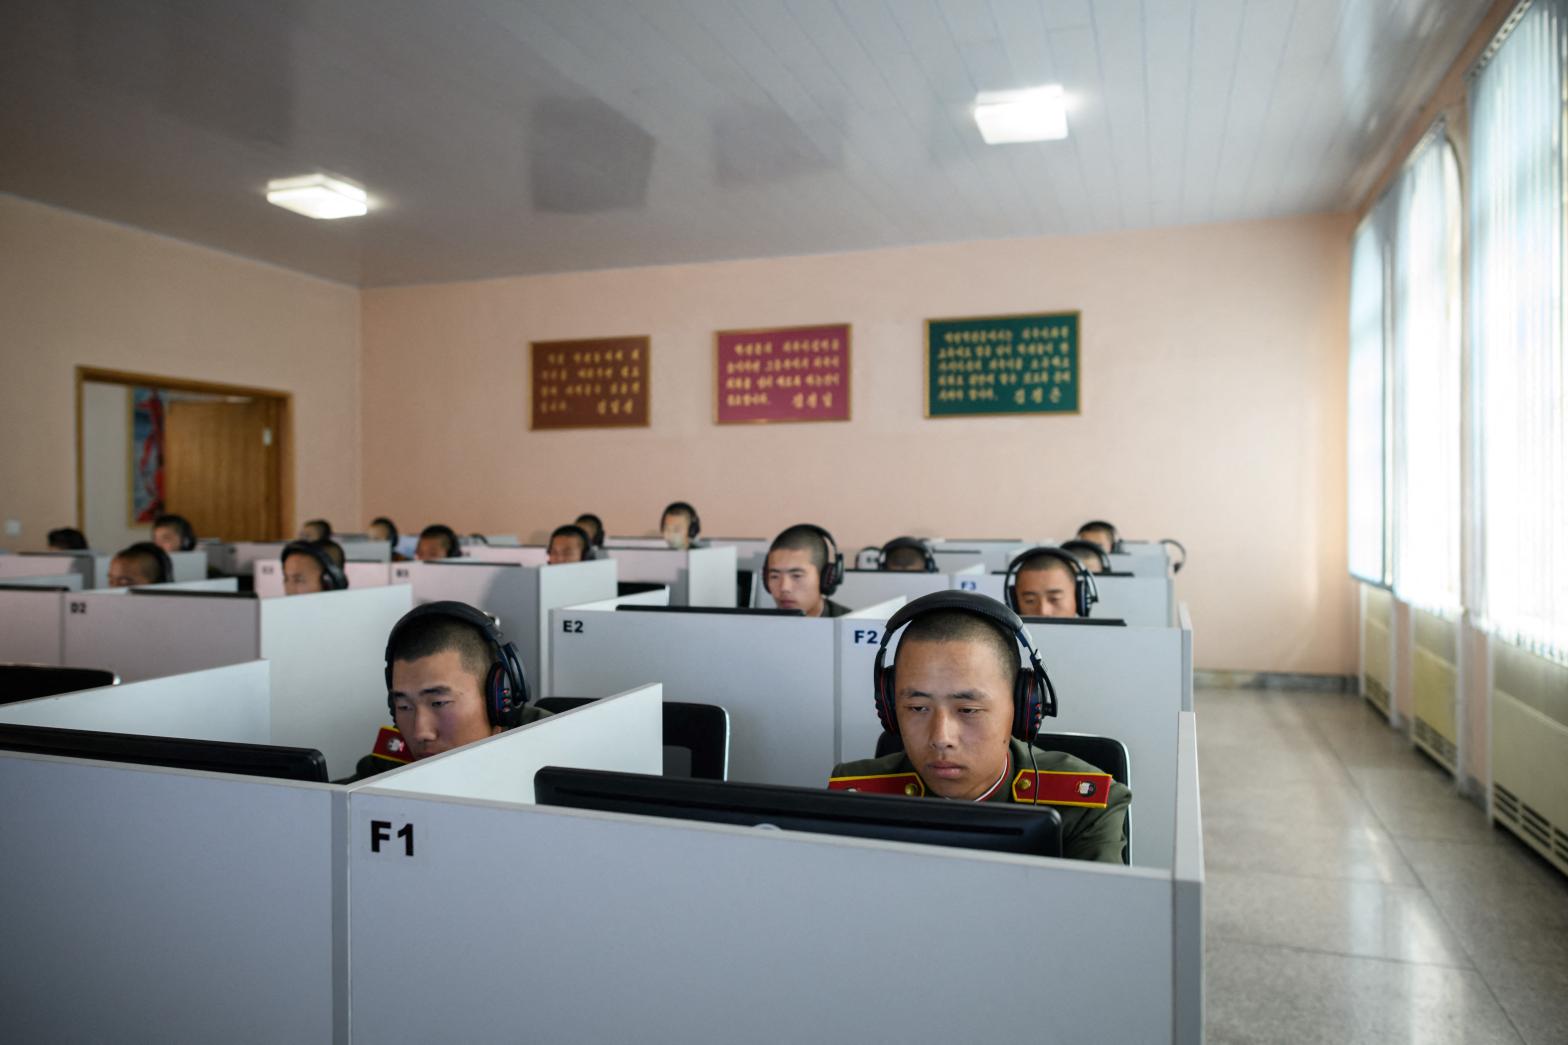 Students wearing Korean People's Army uniforms sit before computer screens as they attend a class at the Mangyongdae Revolutionary School outside Pyongyang in 2018. U.S. officials claim that North Korea has focused on training workers in computer skills before using them to infiltrate companies as undercover IT professionals. (Photo: ED JONES/AFP, Getty Images)